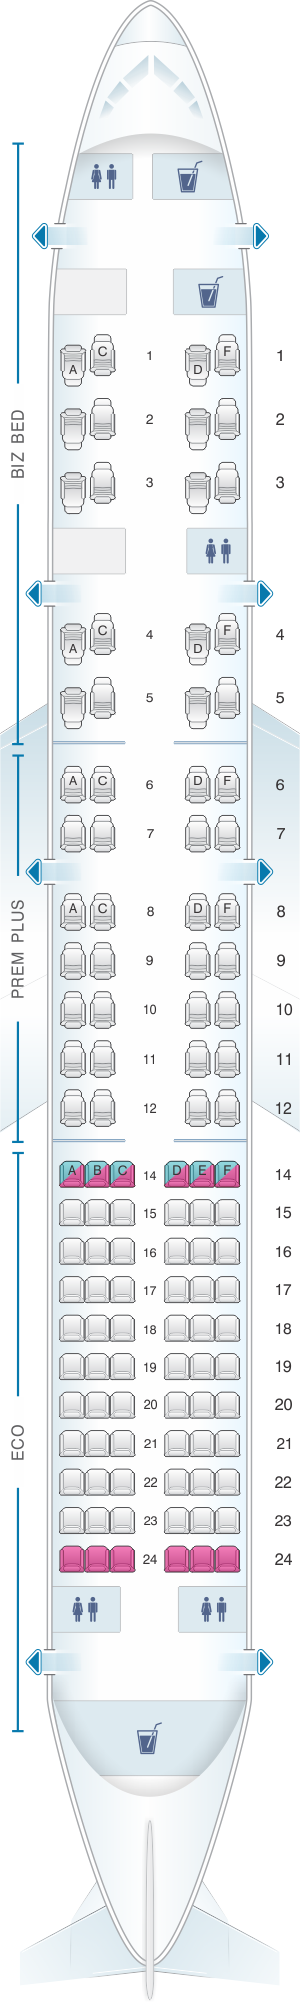 Boeing 757 200 Seating Chart